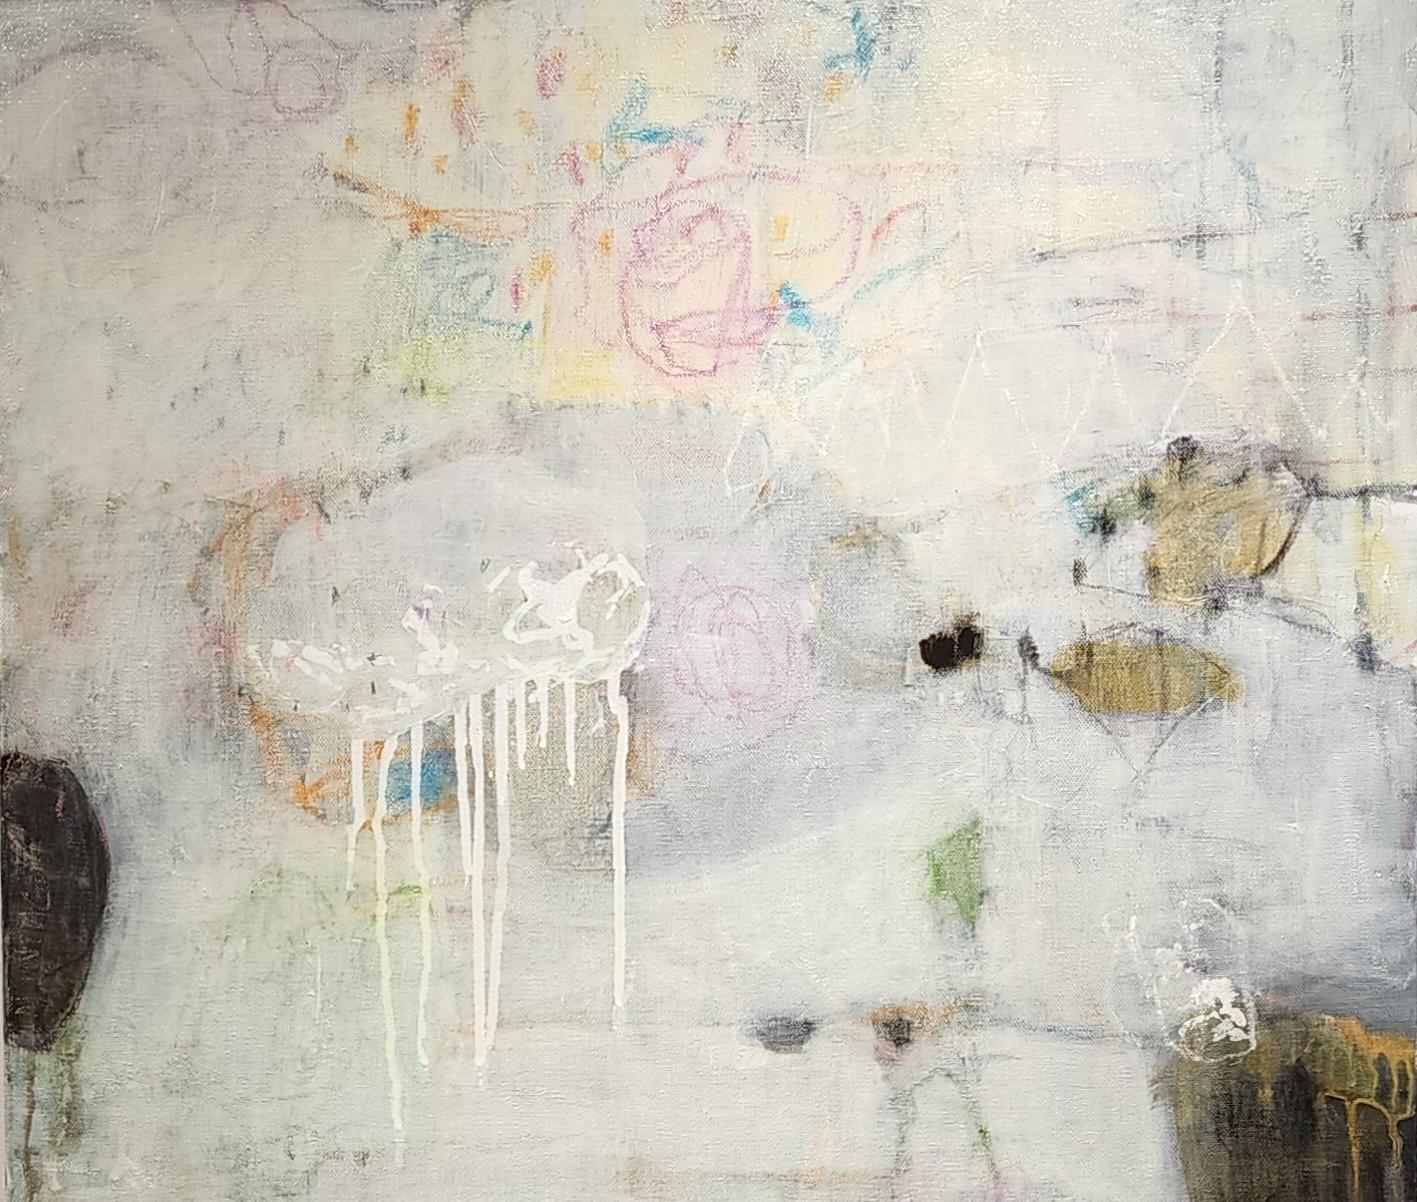 Emergence is an contemporary abstract  painting by Texan artist Eleanor McCarthy.  Eleanor McCarthy uses acrylic paints on canvas to create the soothing colors in her new contemporary paintings that were just painted in 2023.  LOOK FOR SHIPPING